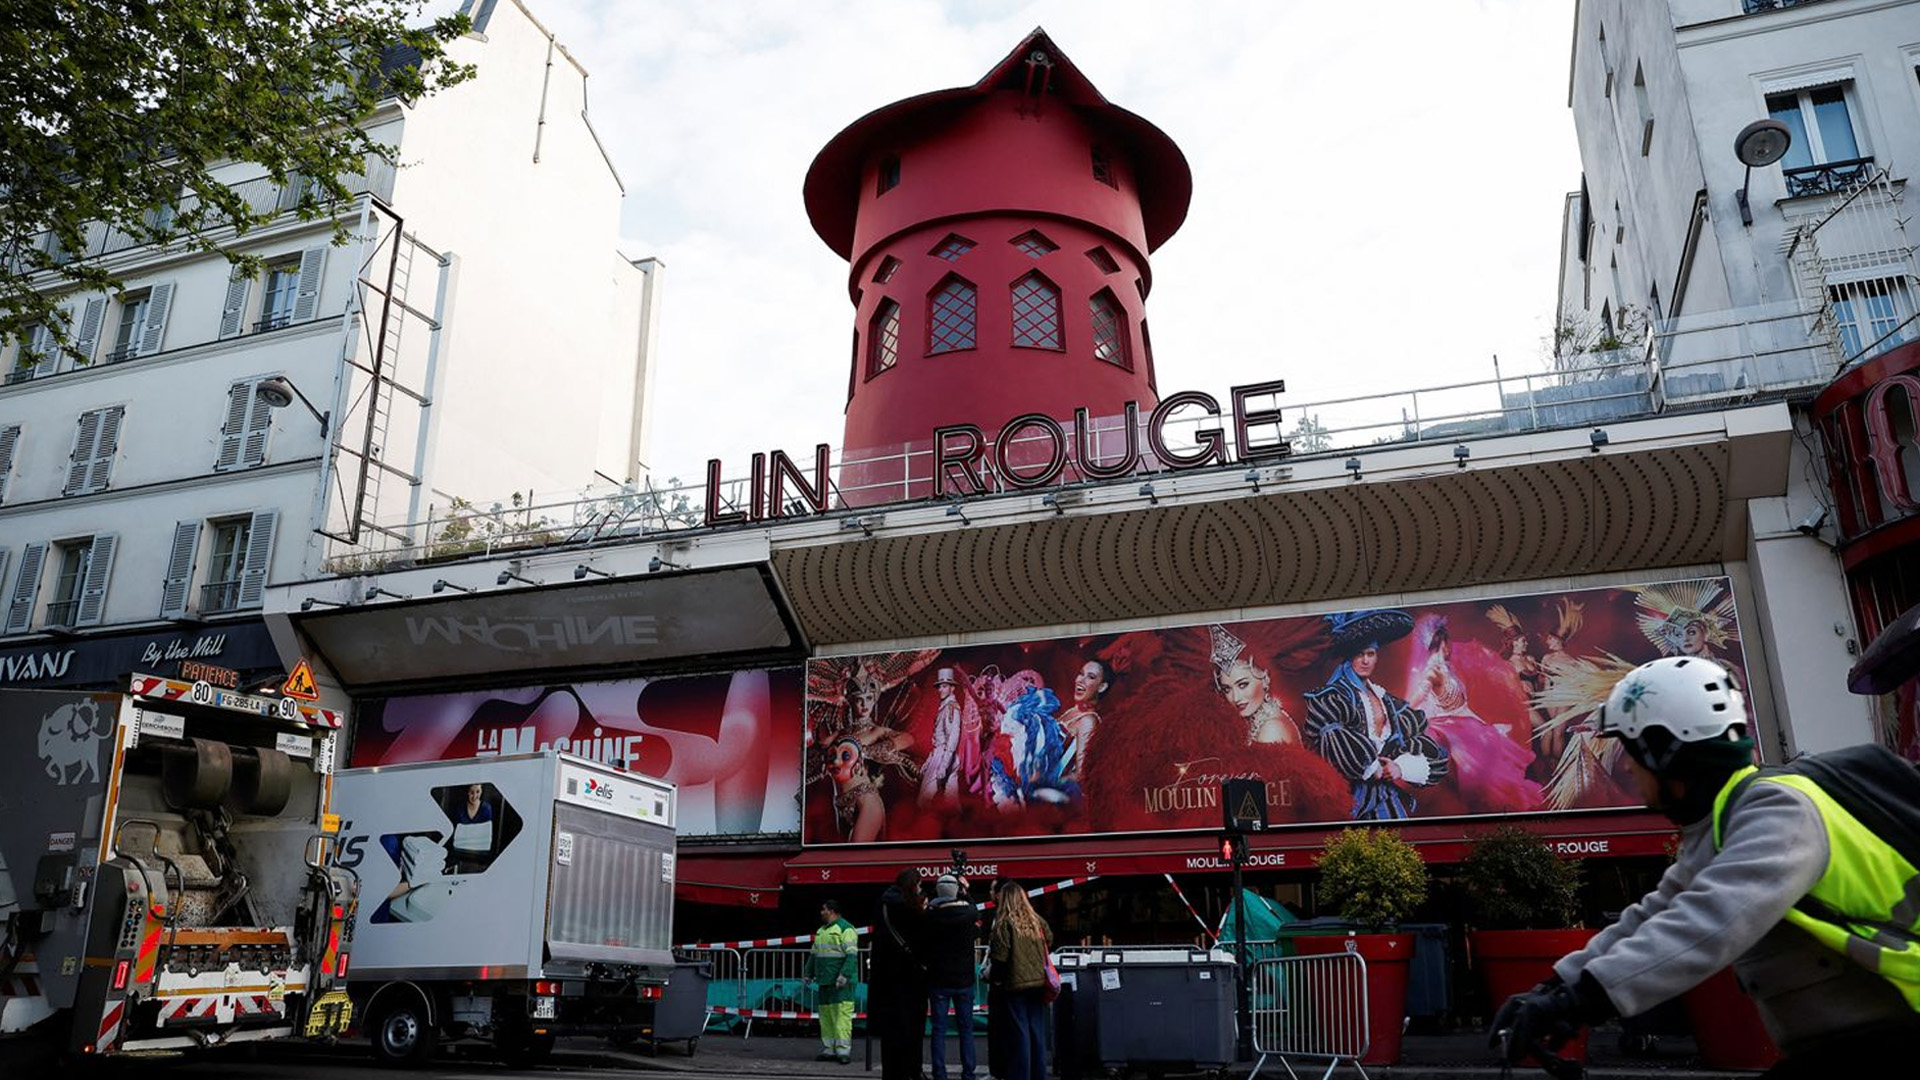 Iconic Blades Fall at Paris's Famous Moulin Rouge